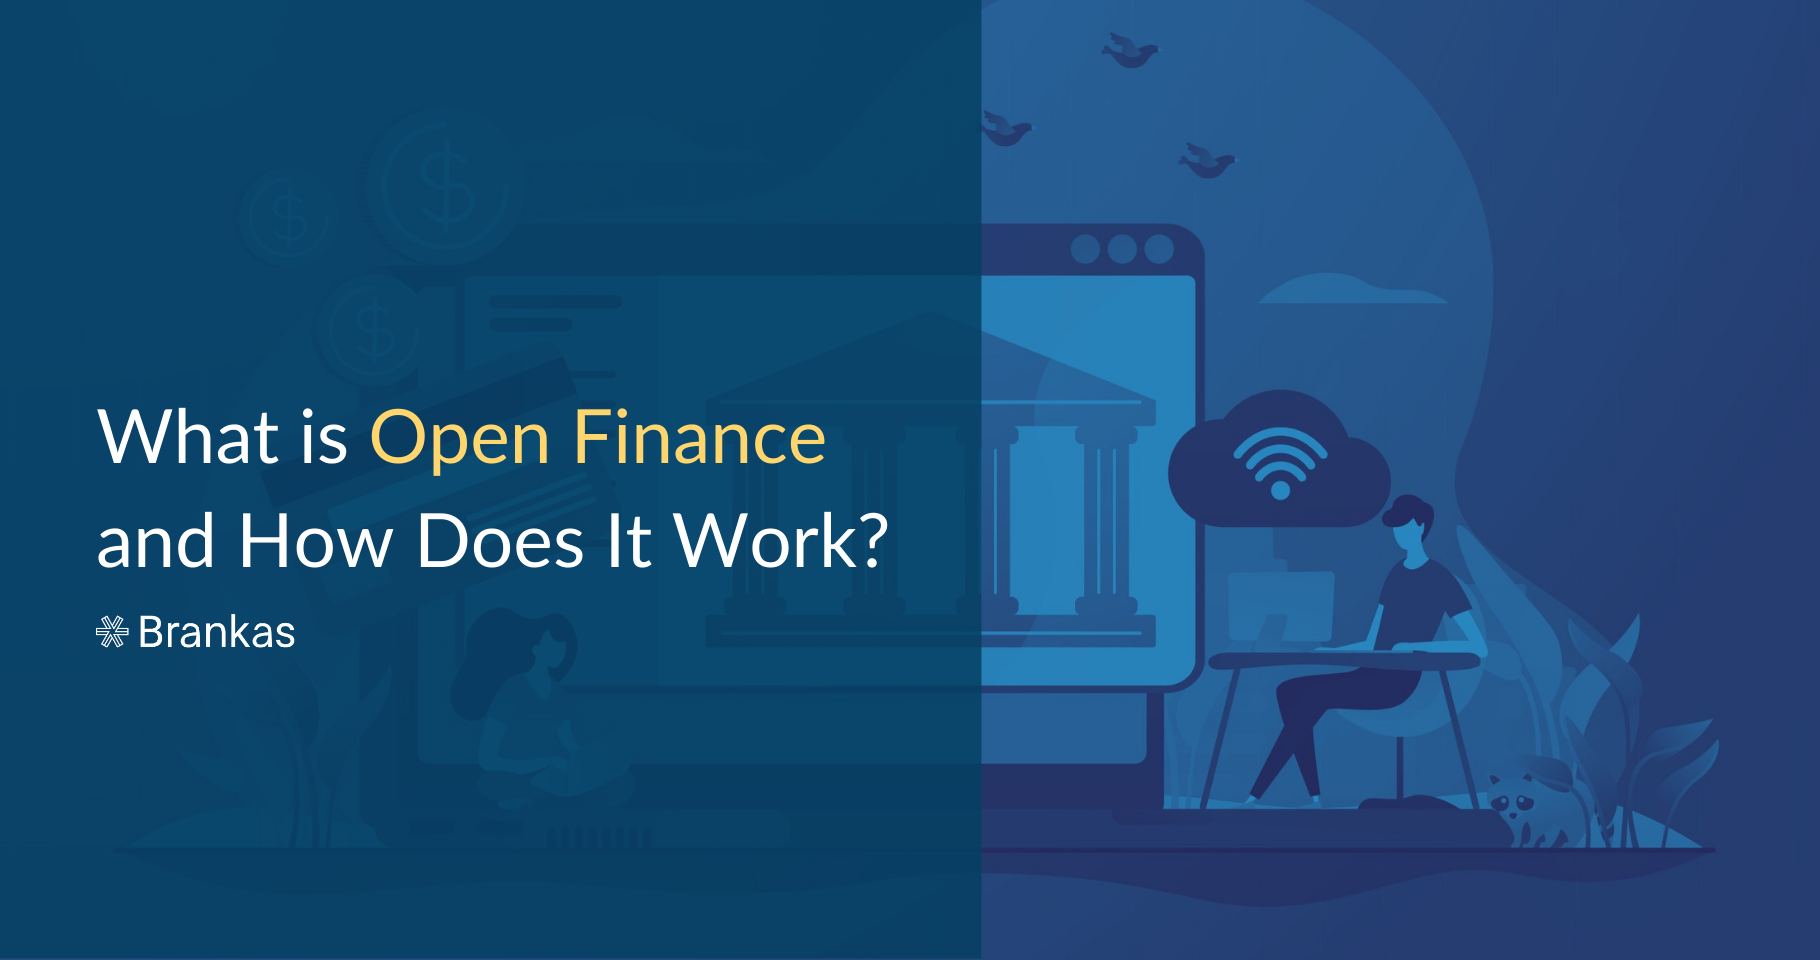 What is Open Finance and How Does It Work?